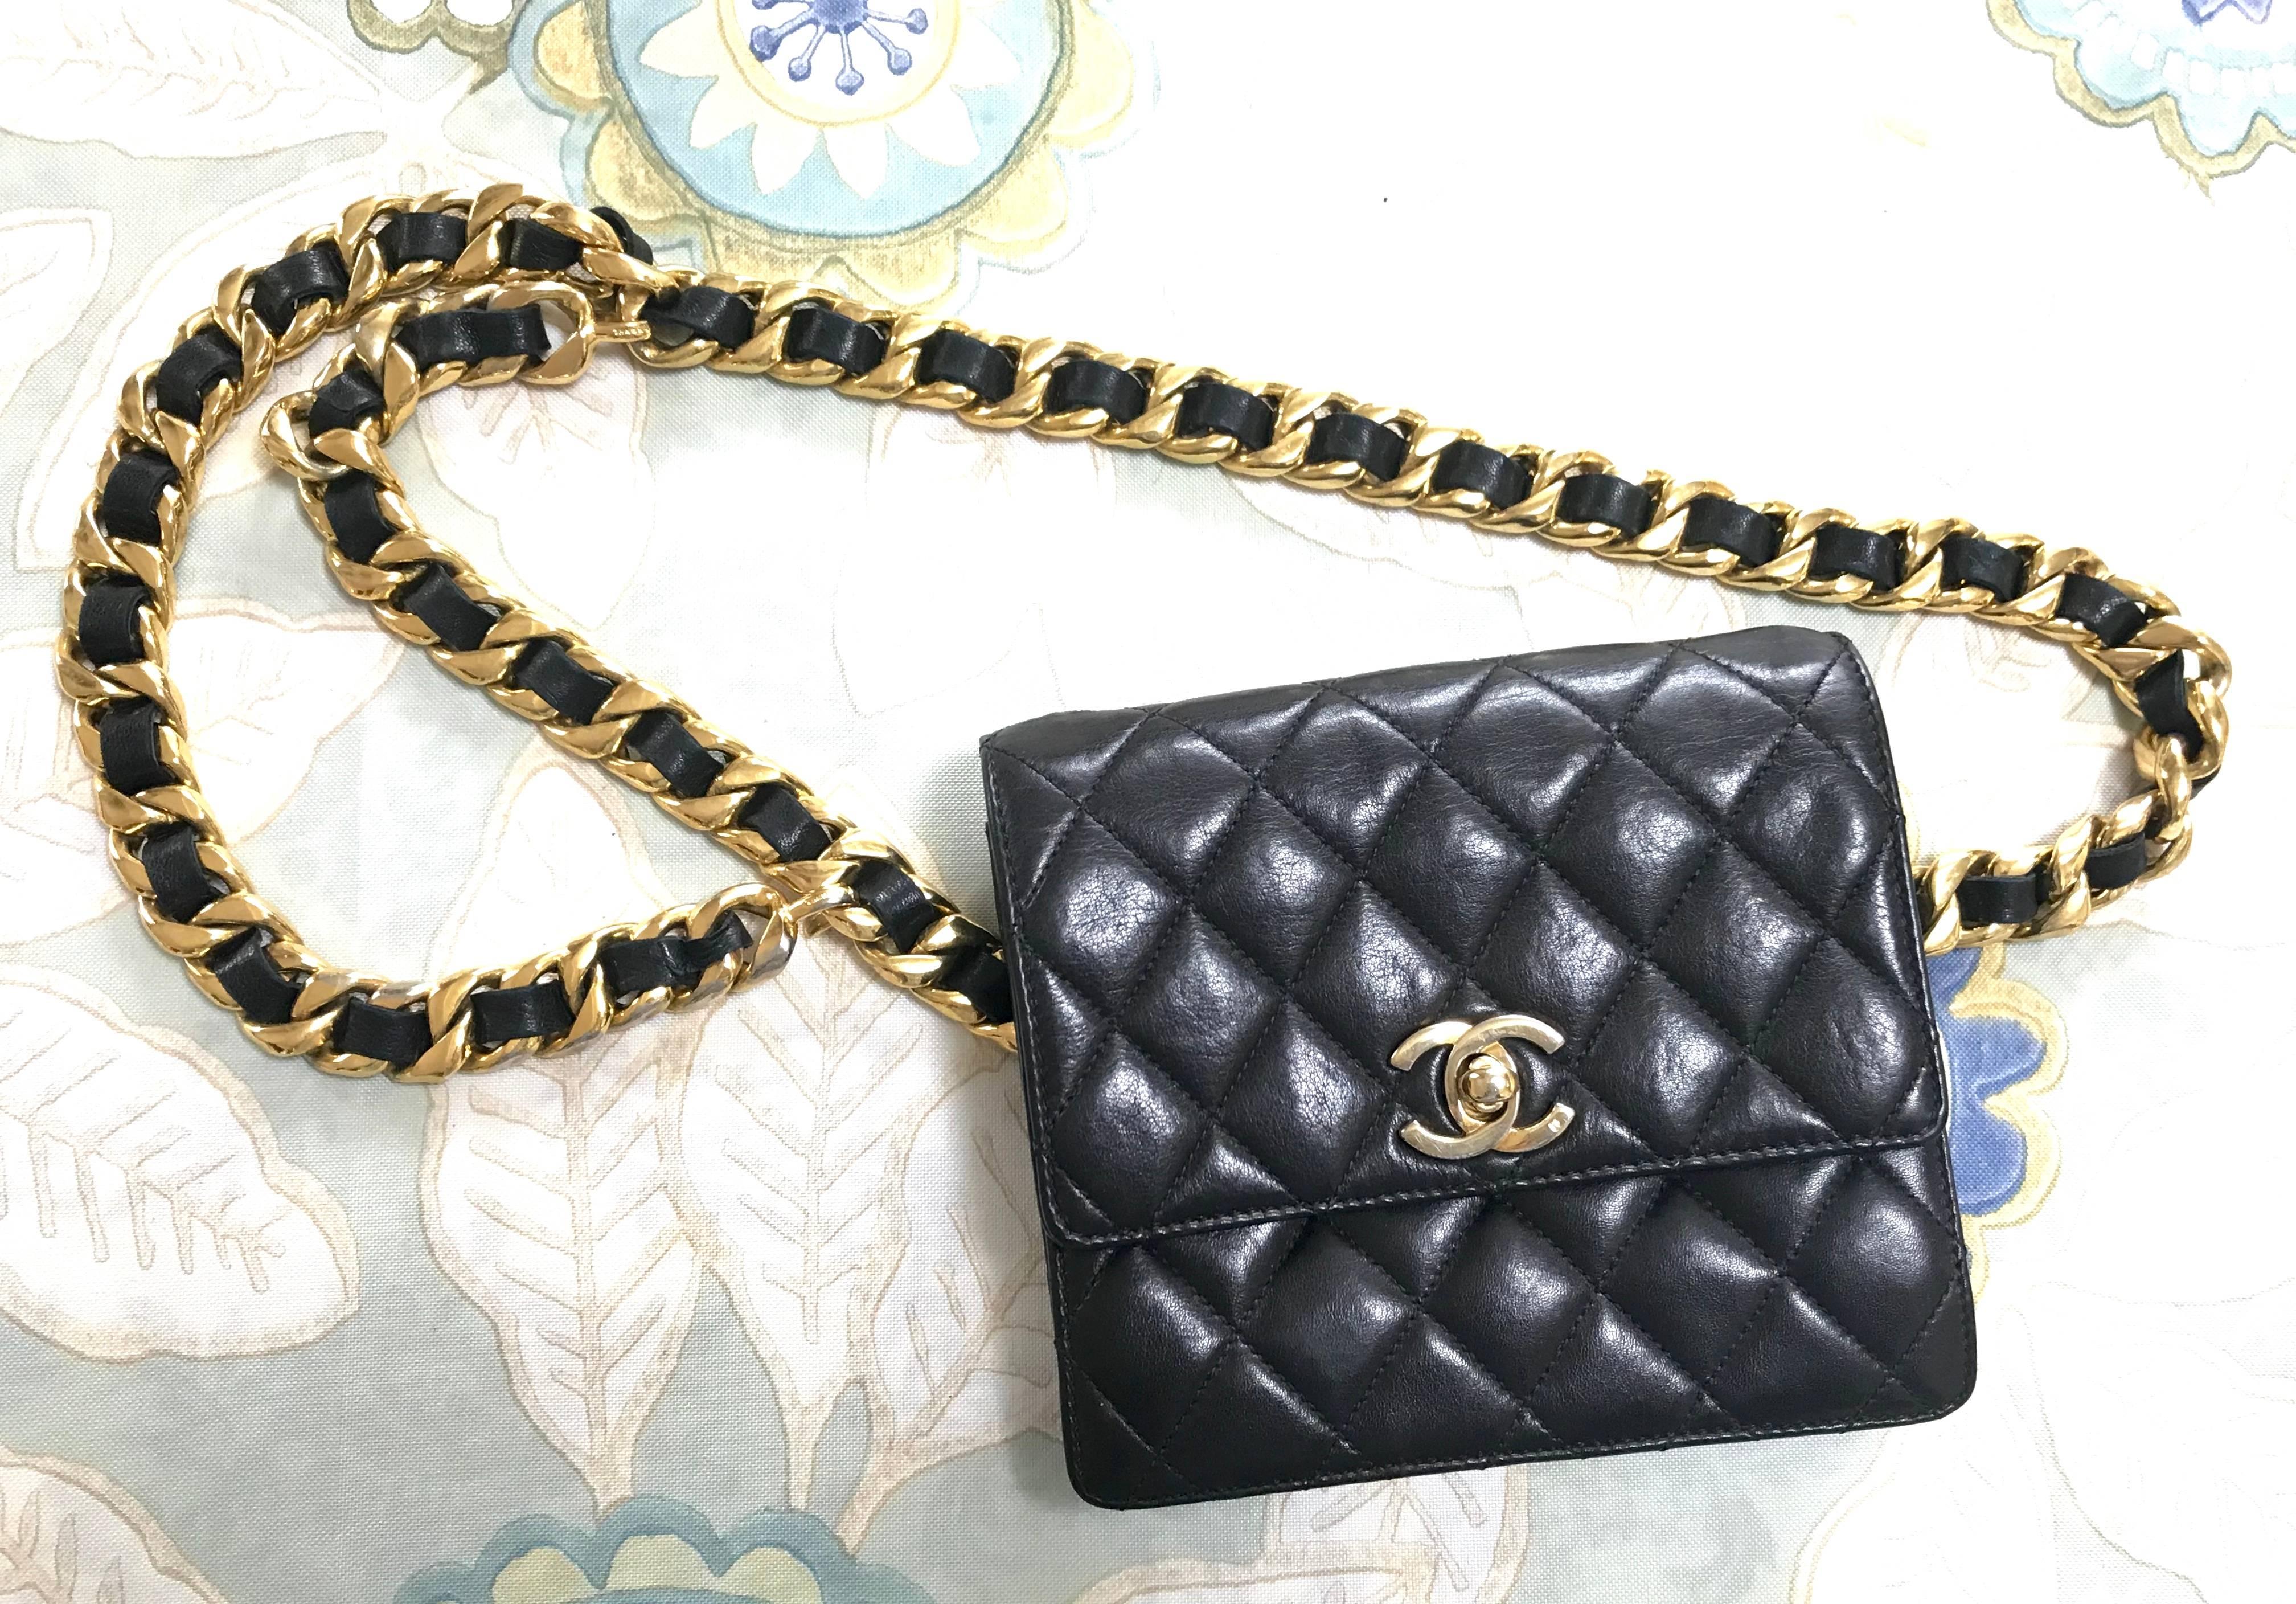 Chanel Vintage square 2.55 black fanny pack / pouch bag with thick chain belt  8